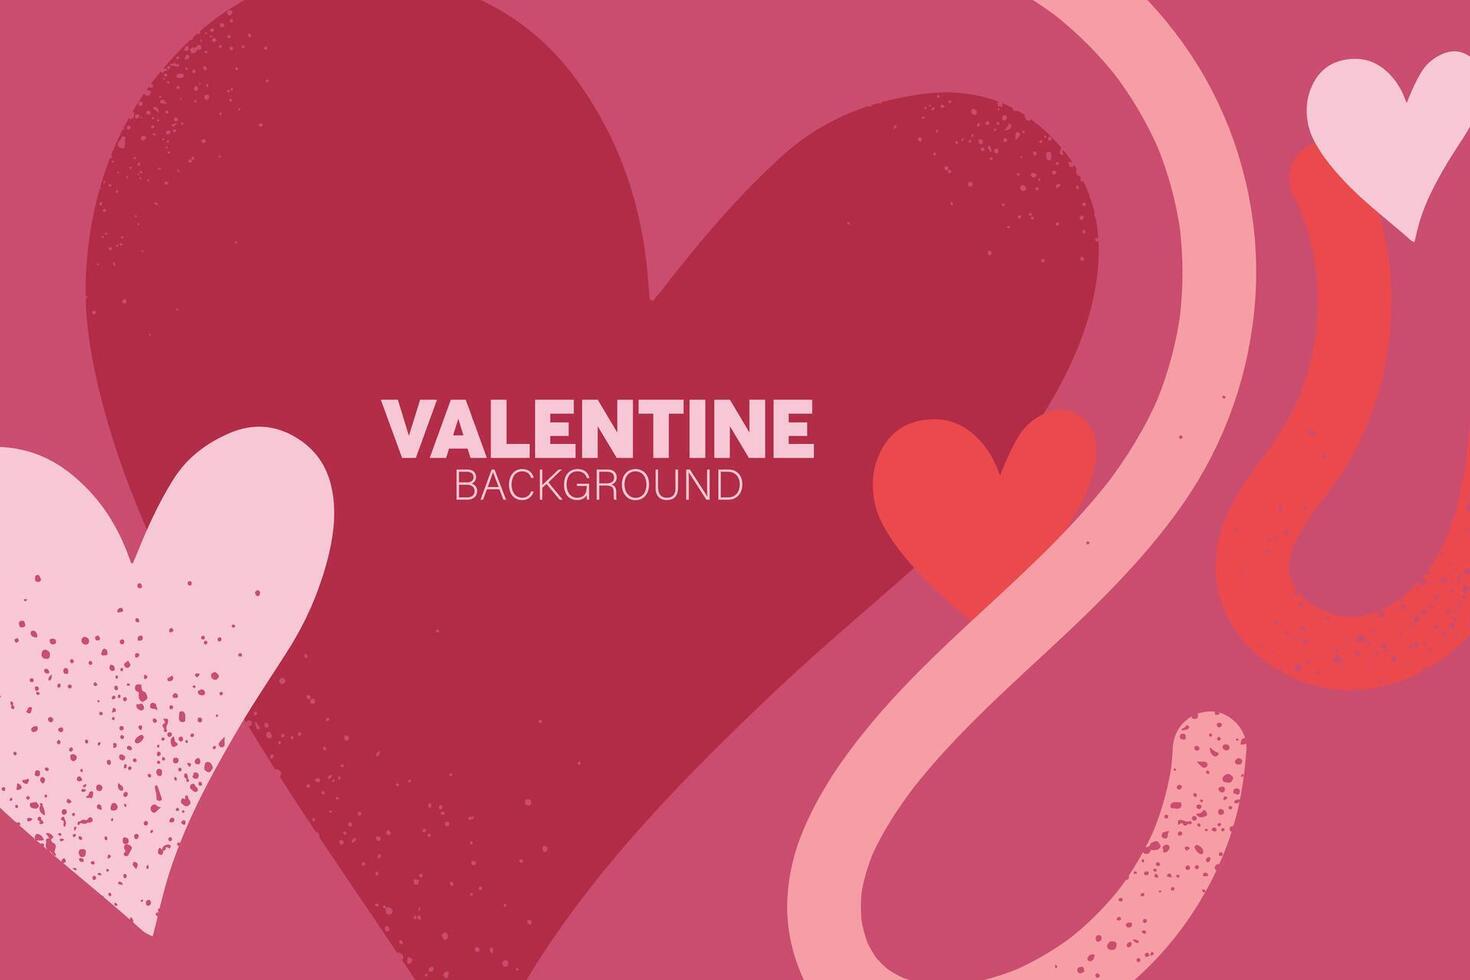 Horizontal banner with pink and heart object. Place for text. Happy Valentines day. valentine with pastel colors. vector